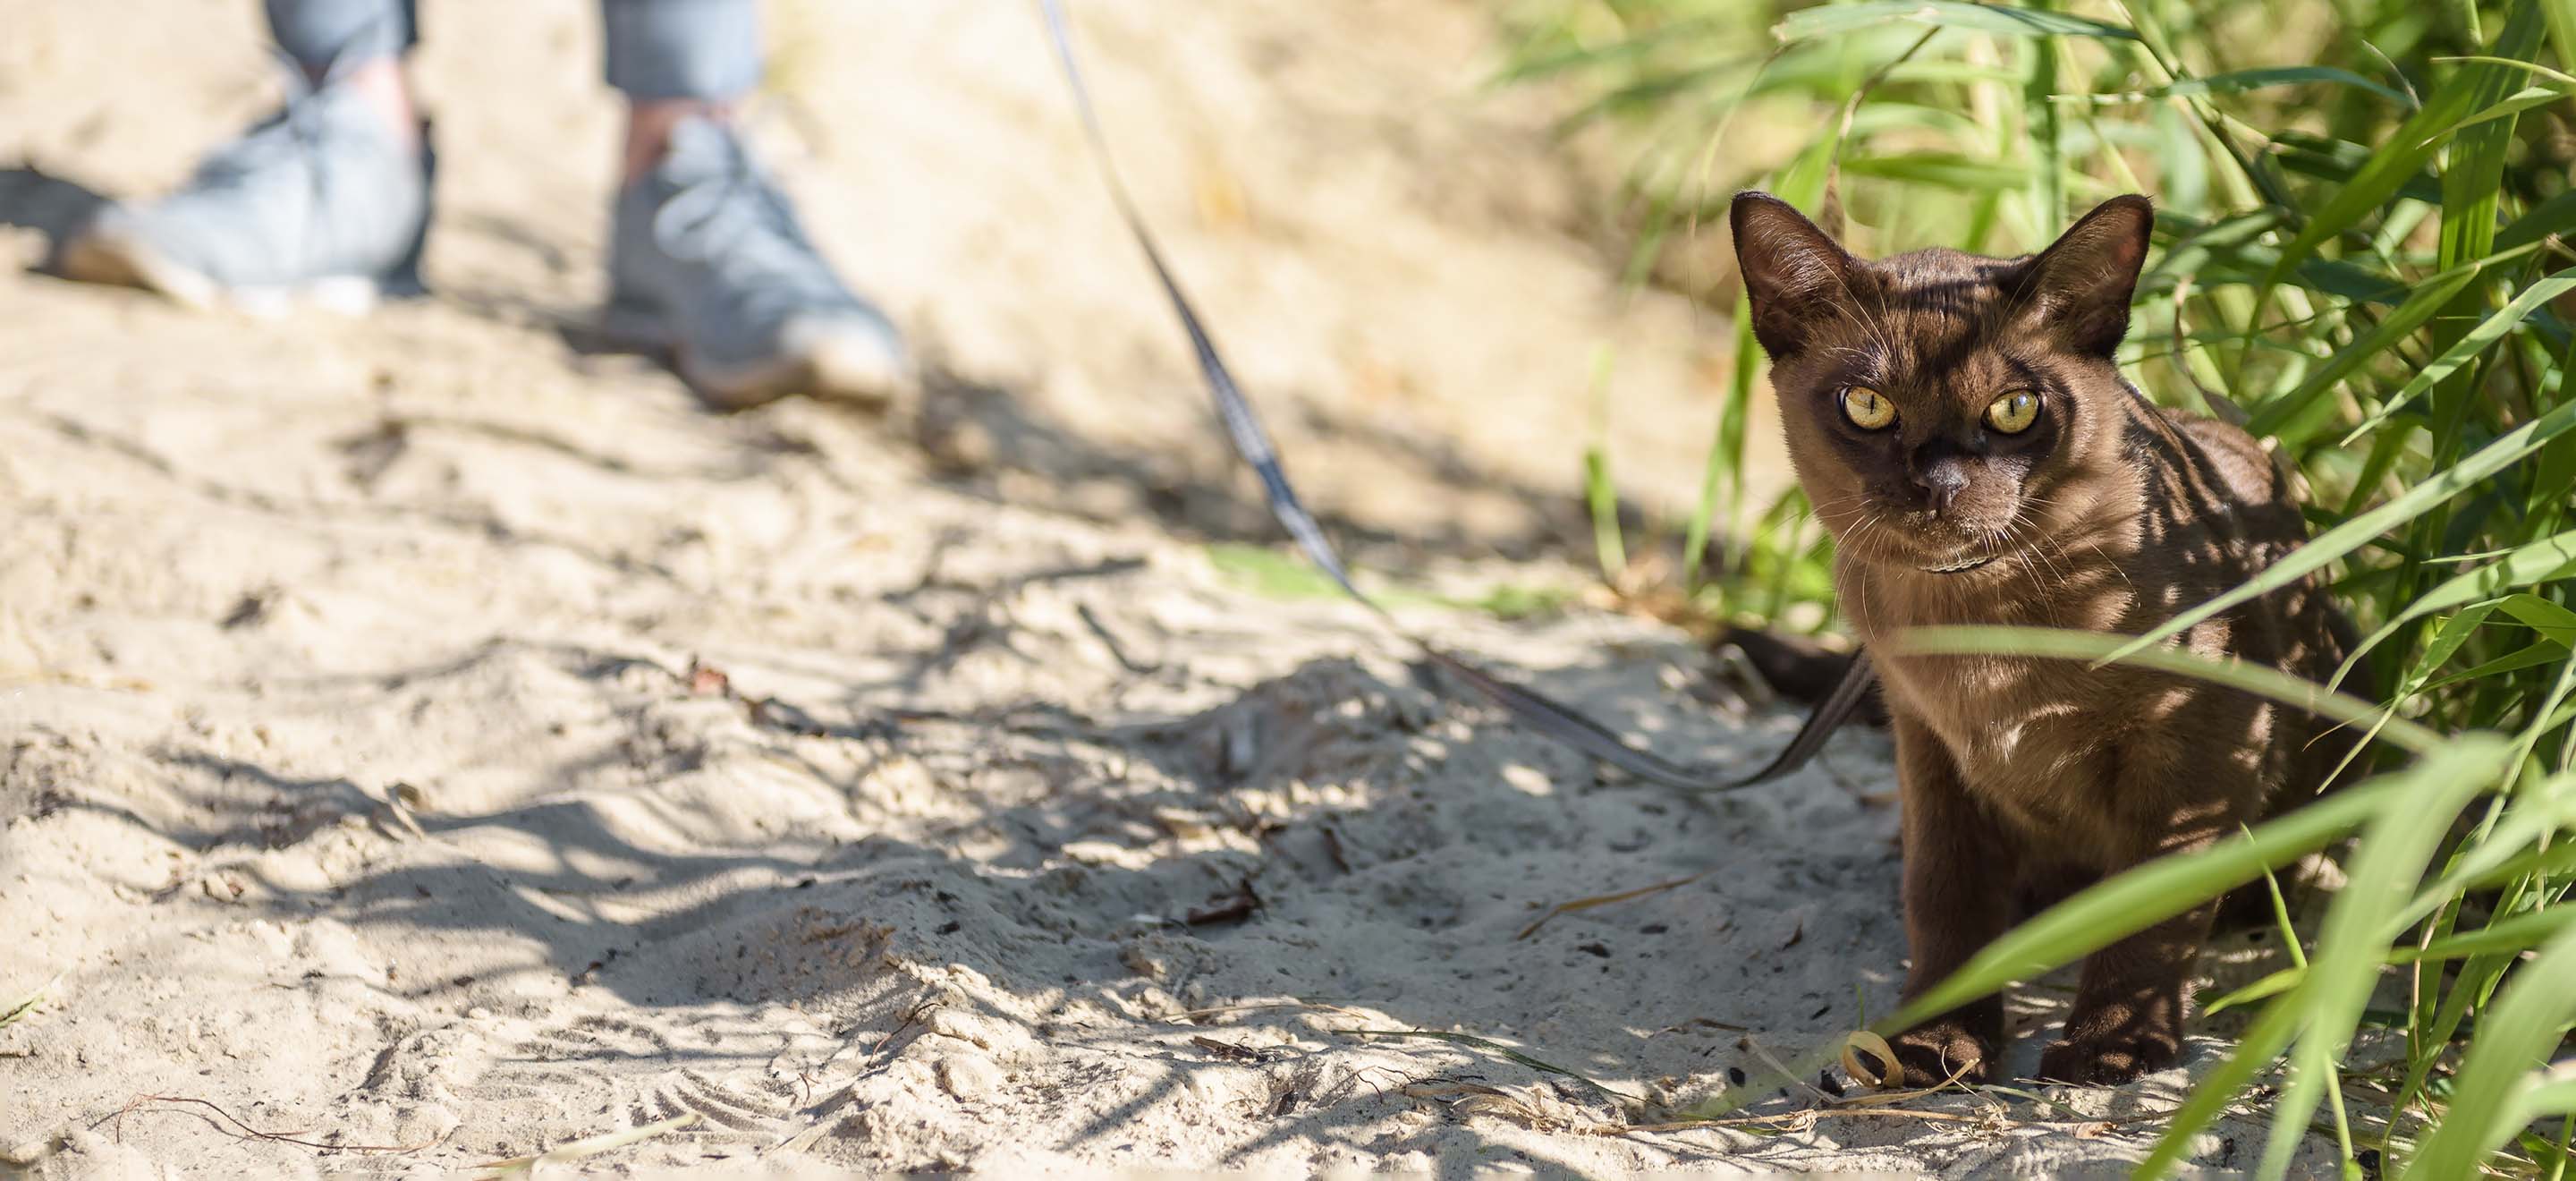 A Burmese cat standing in the shelter of tall grass at the beach image